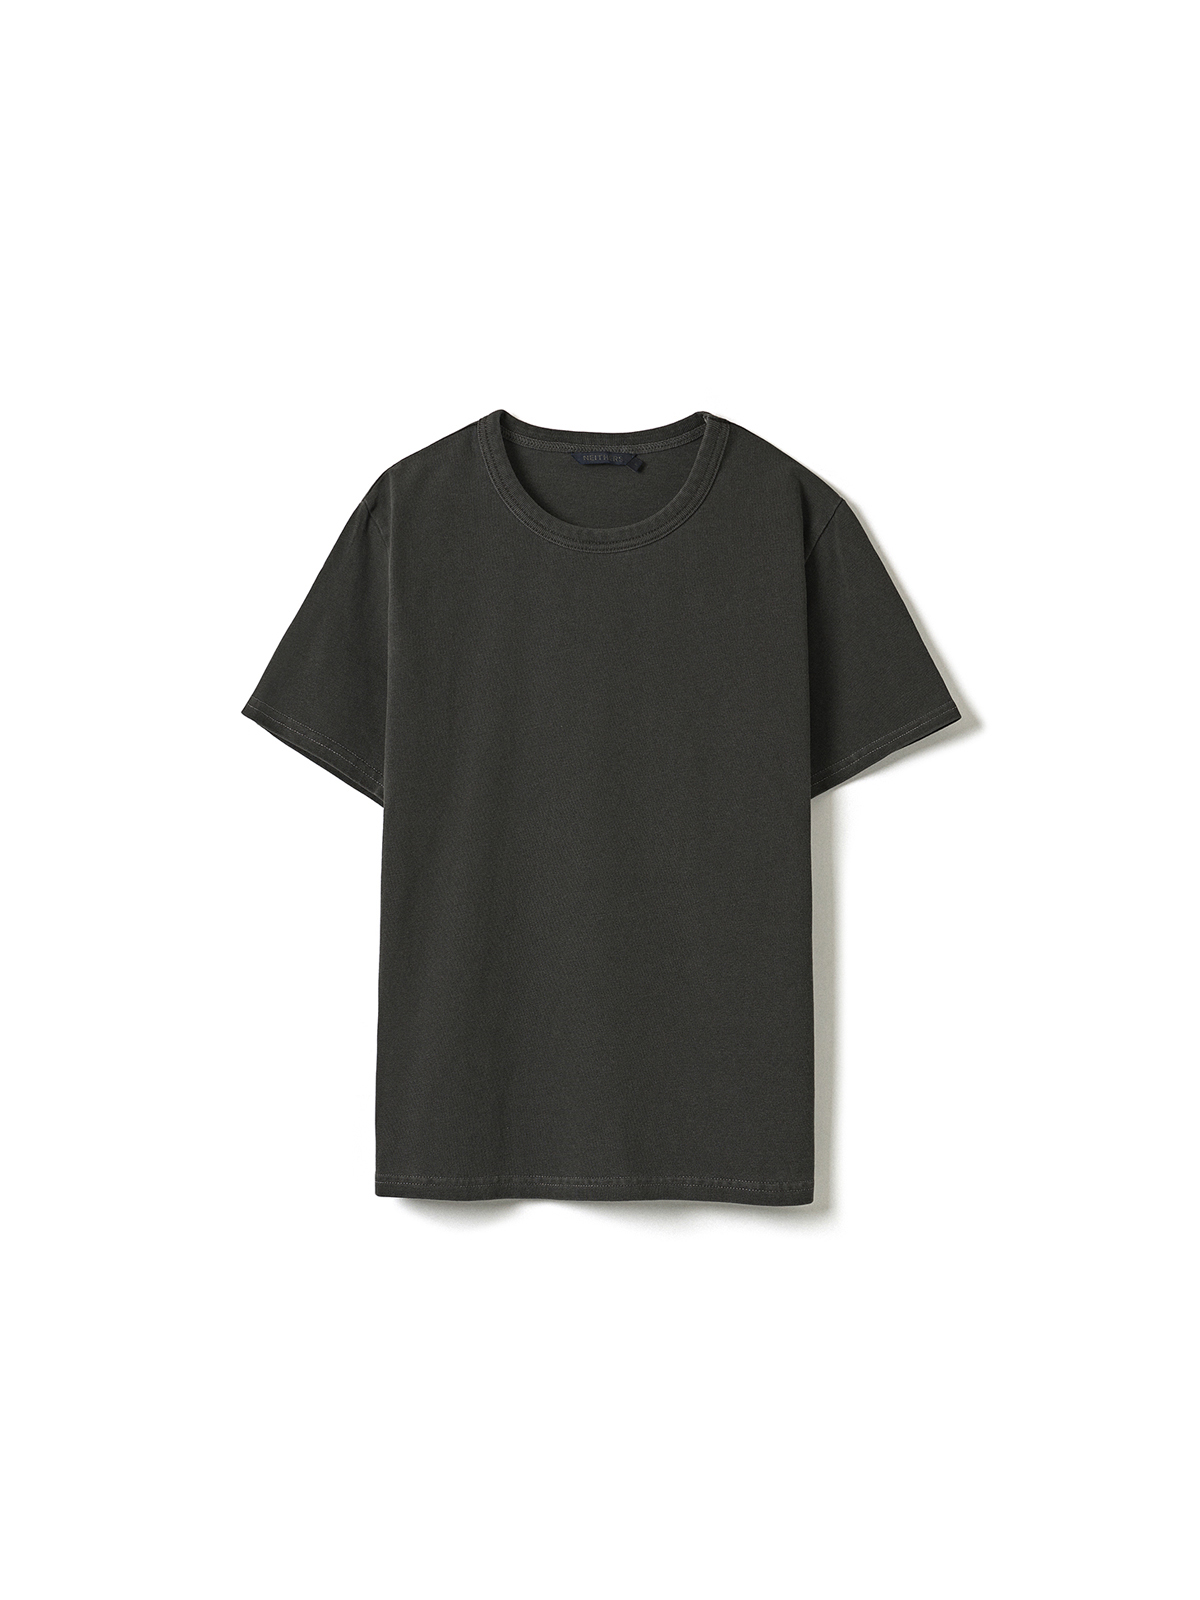 GARMENT DYED T- FOR WOMEN (INK BLACK)